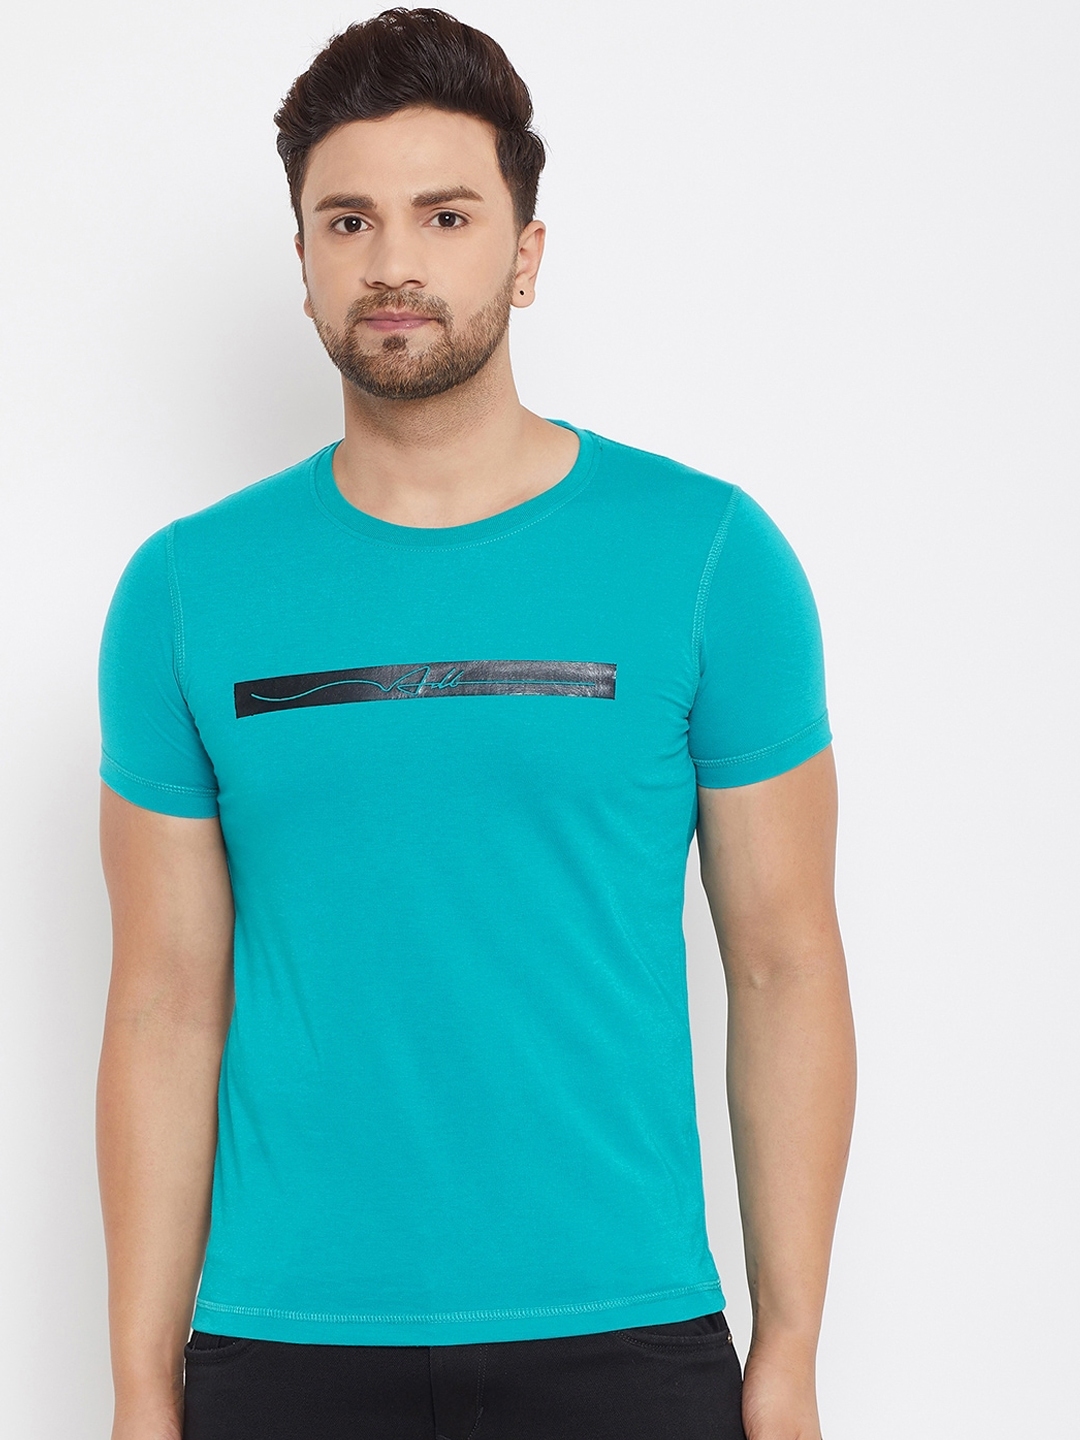 Buy Adobe Men Turquoise Blue Solid Round Neck T Shirt - Tshirts for Men ...